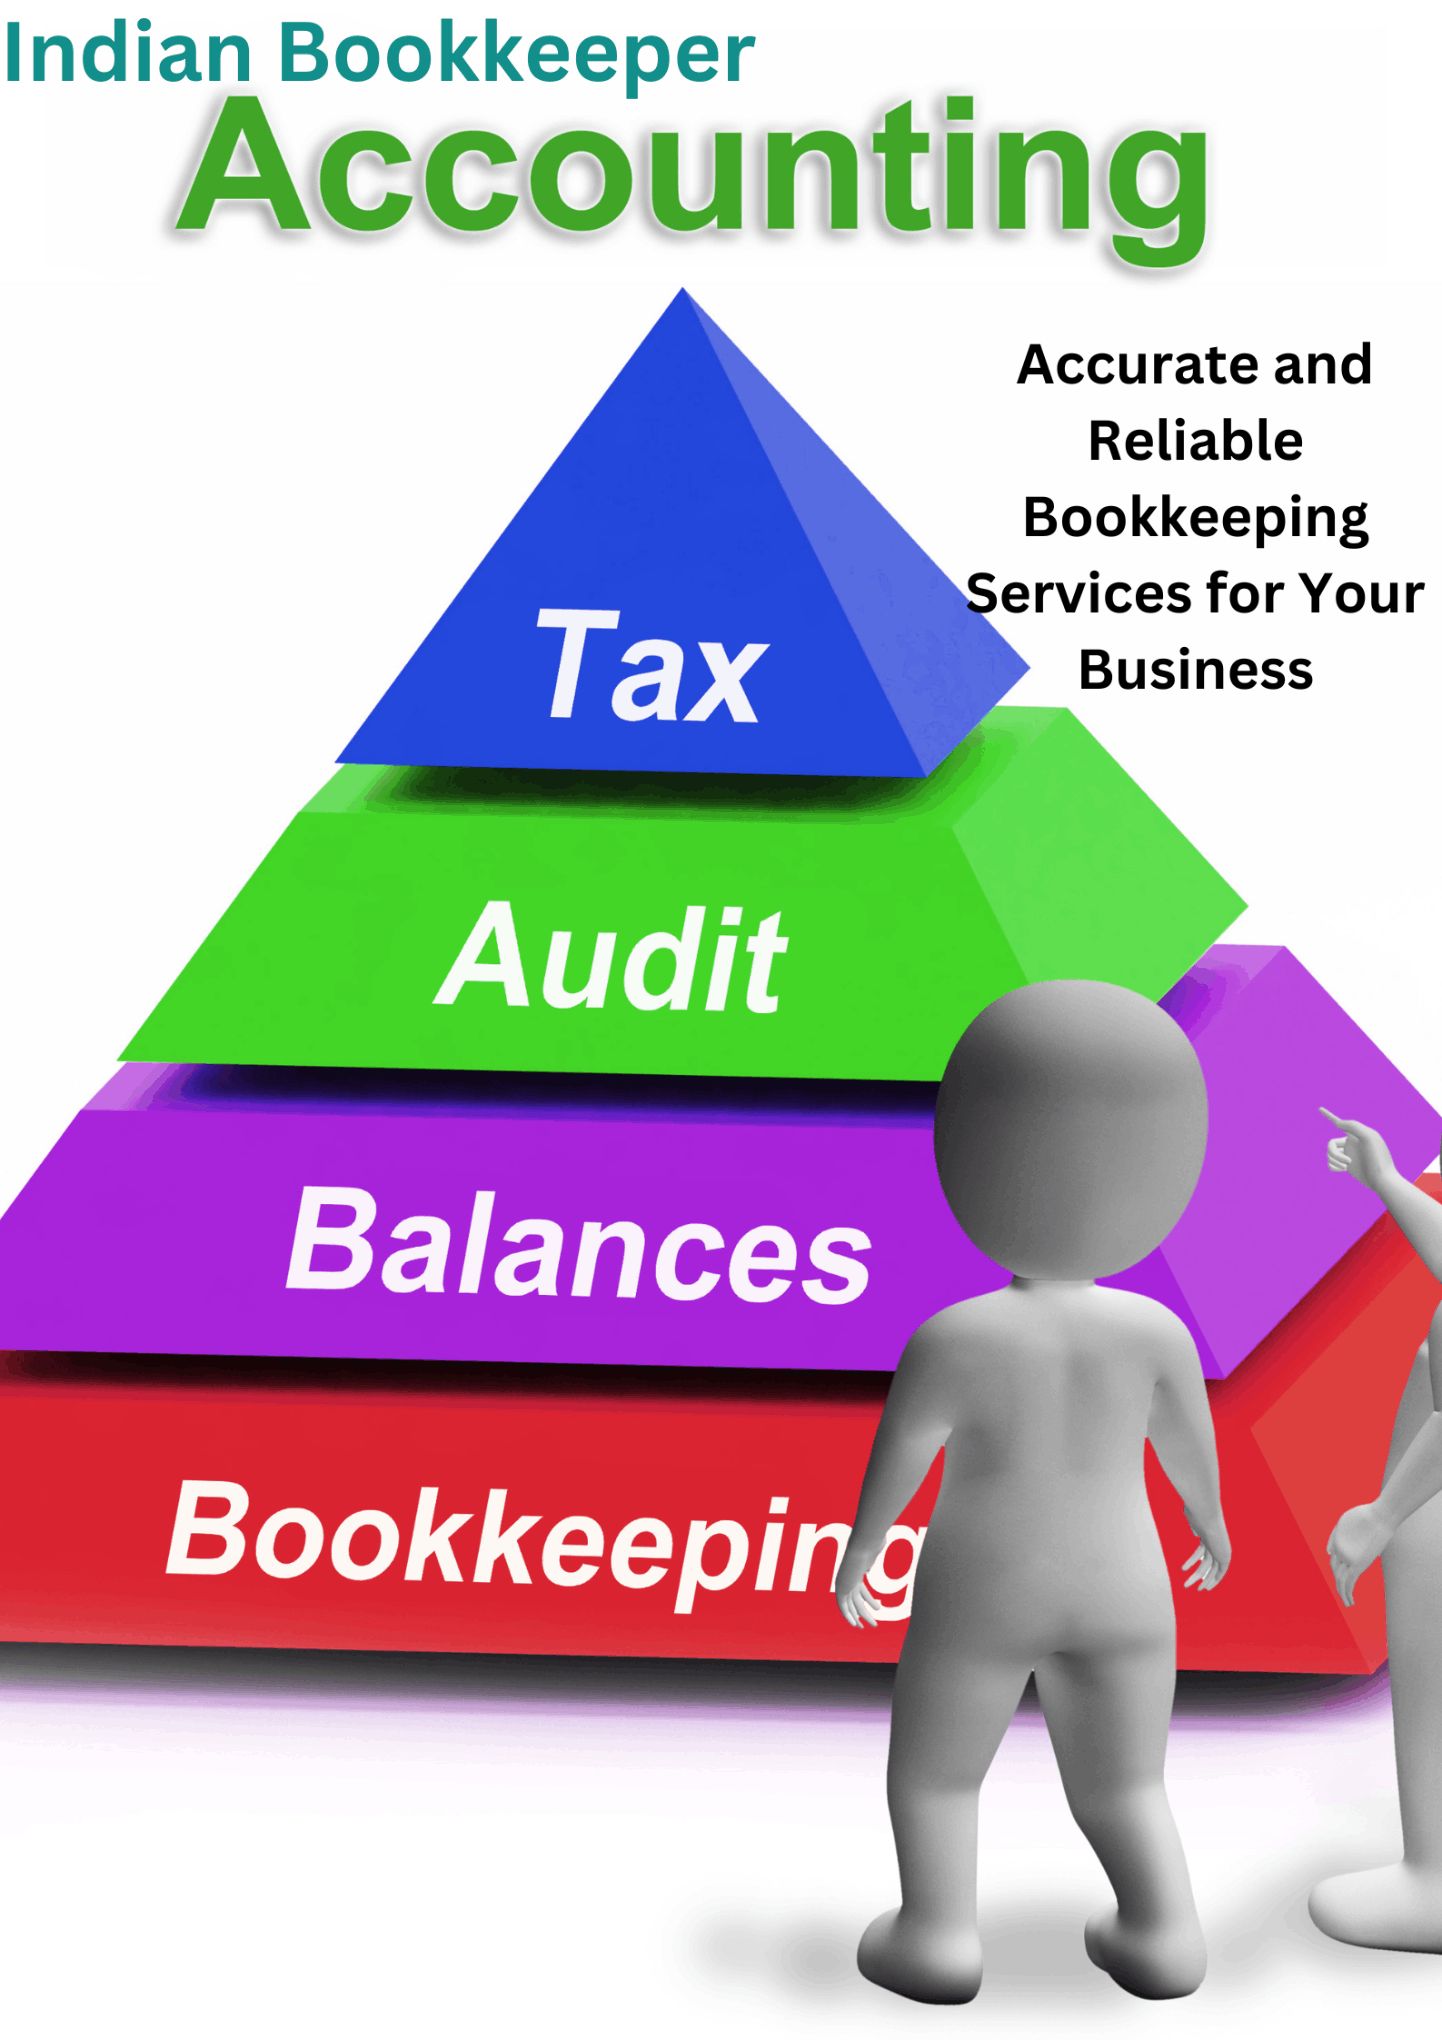 outsource bookkeeping services| Indian Bookkeeper